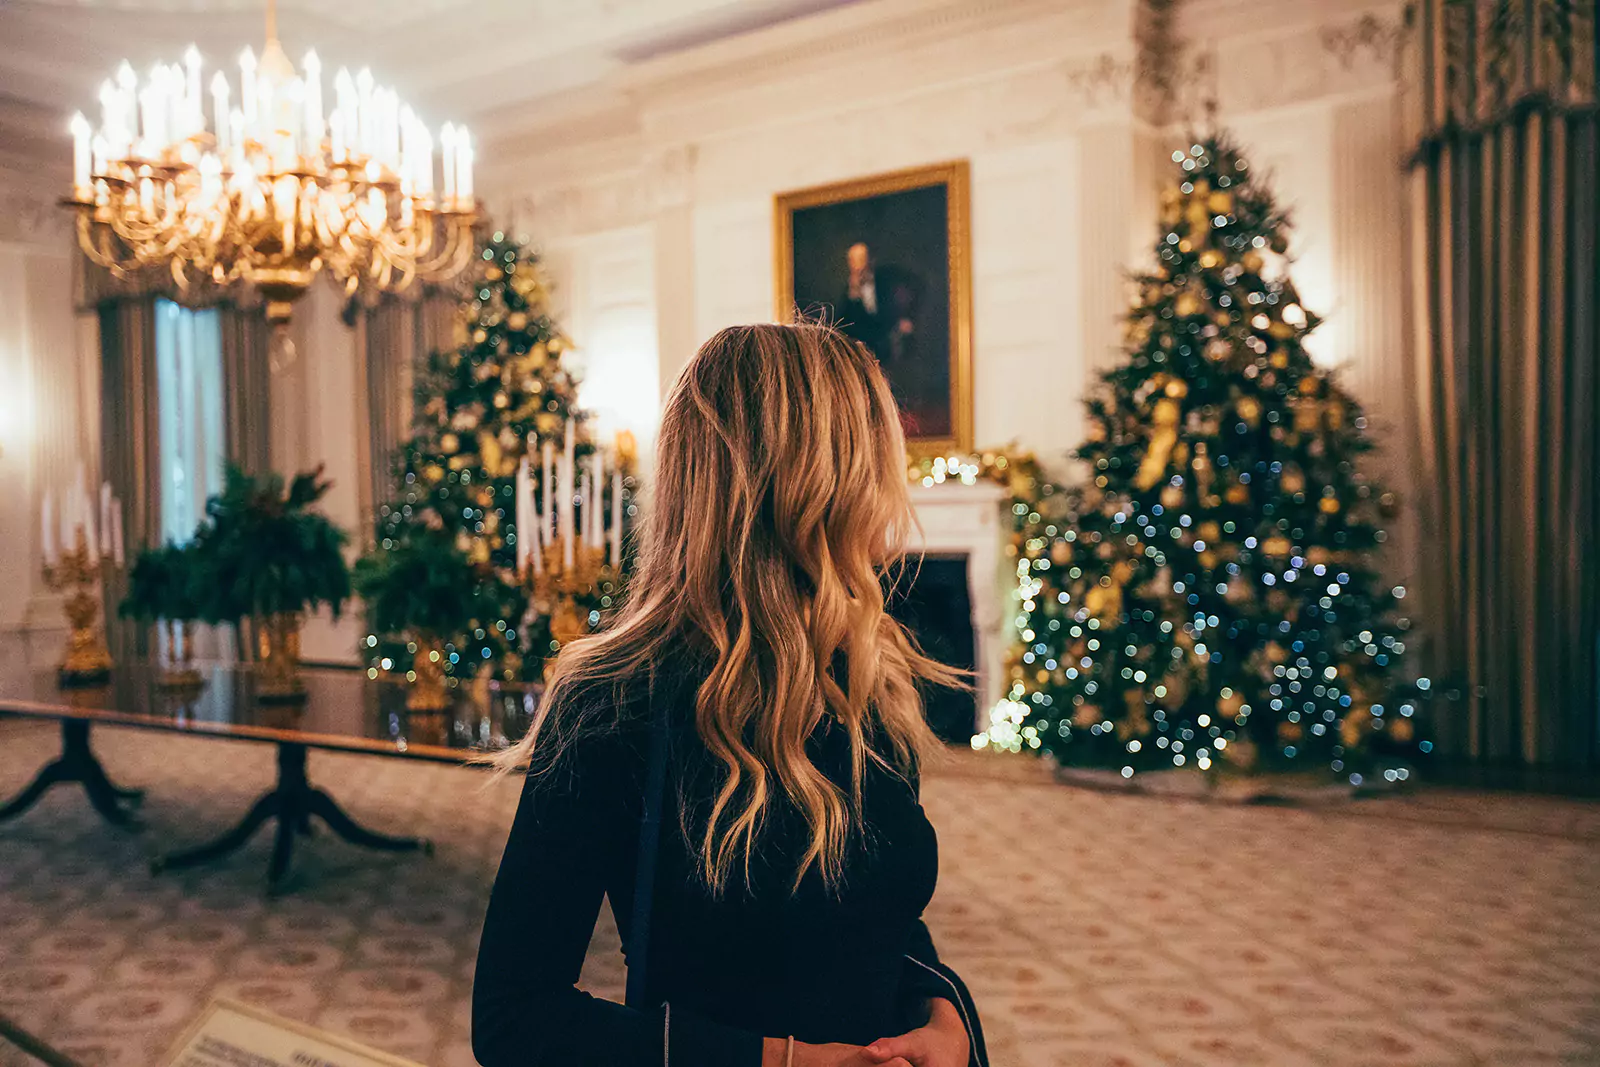 Woman in Luxury Home Wearing Long Sleeved Black Dress Viewing The Decorated Christmas Trees